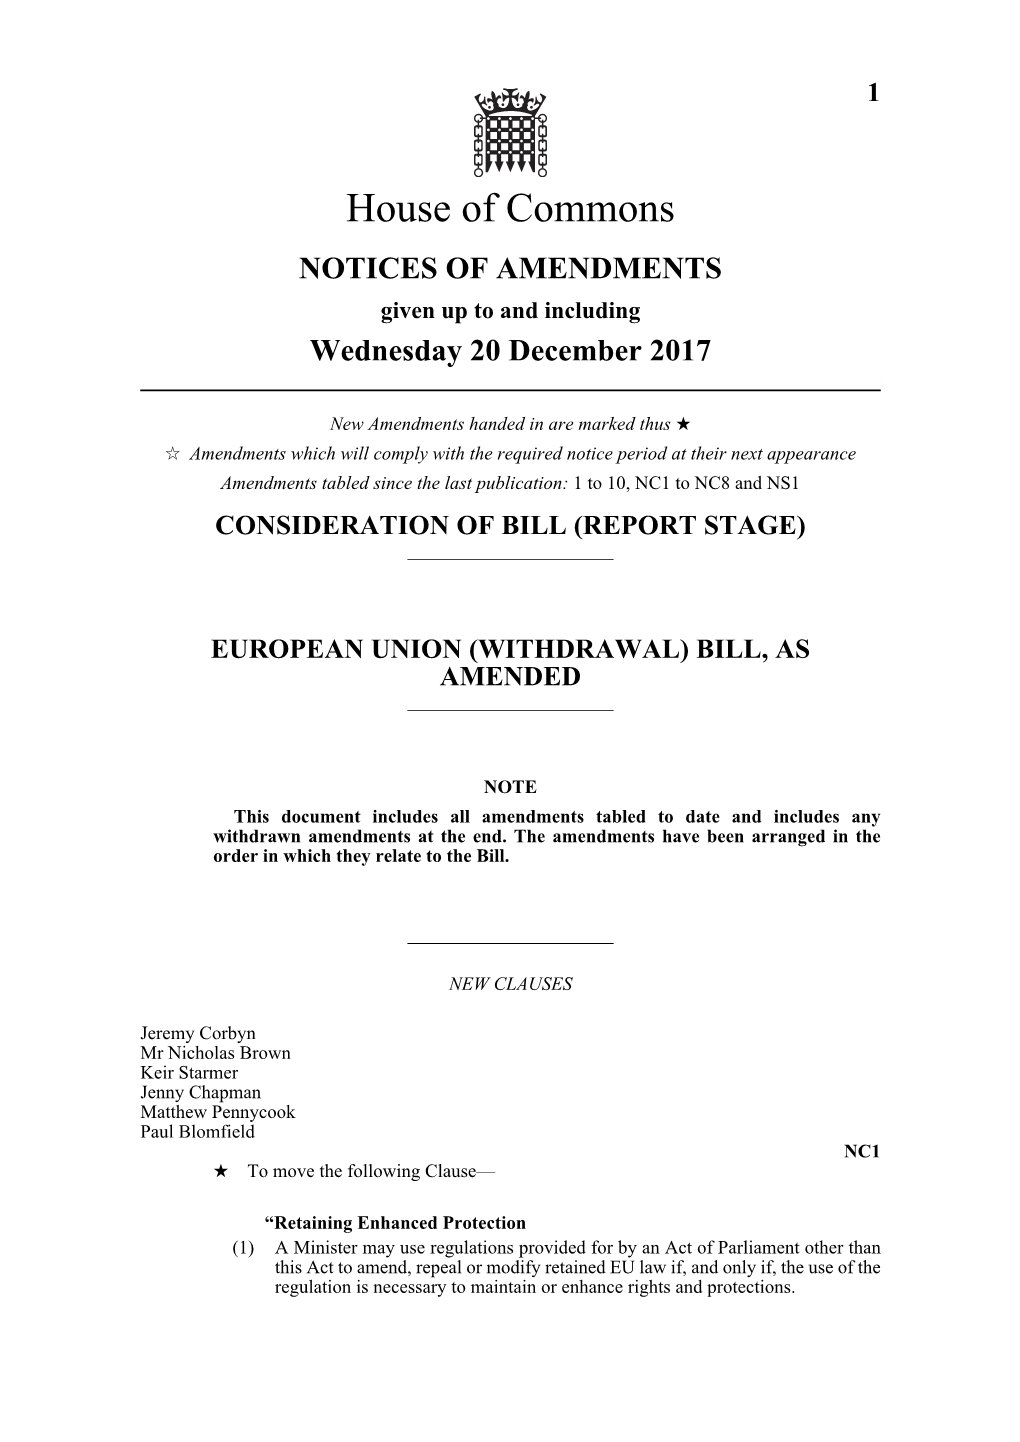 (Withdrawal) Bill, As Amended